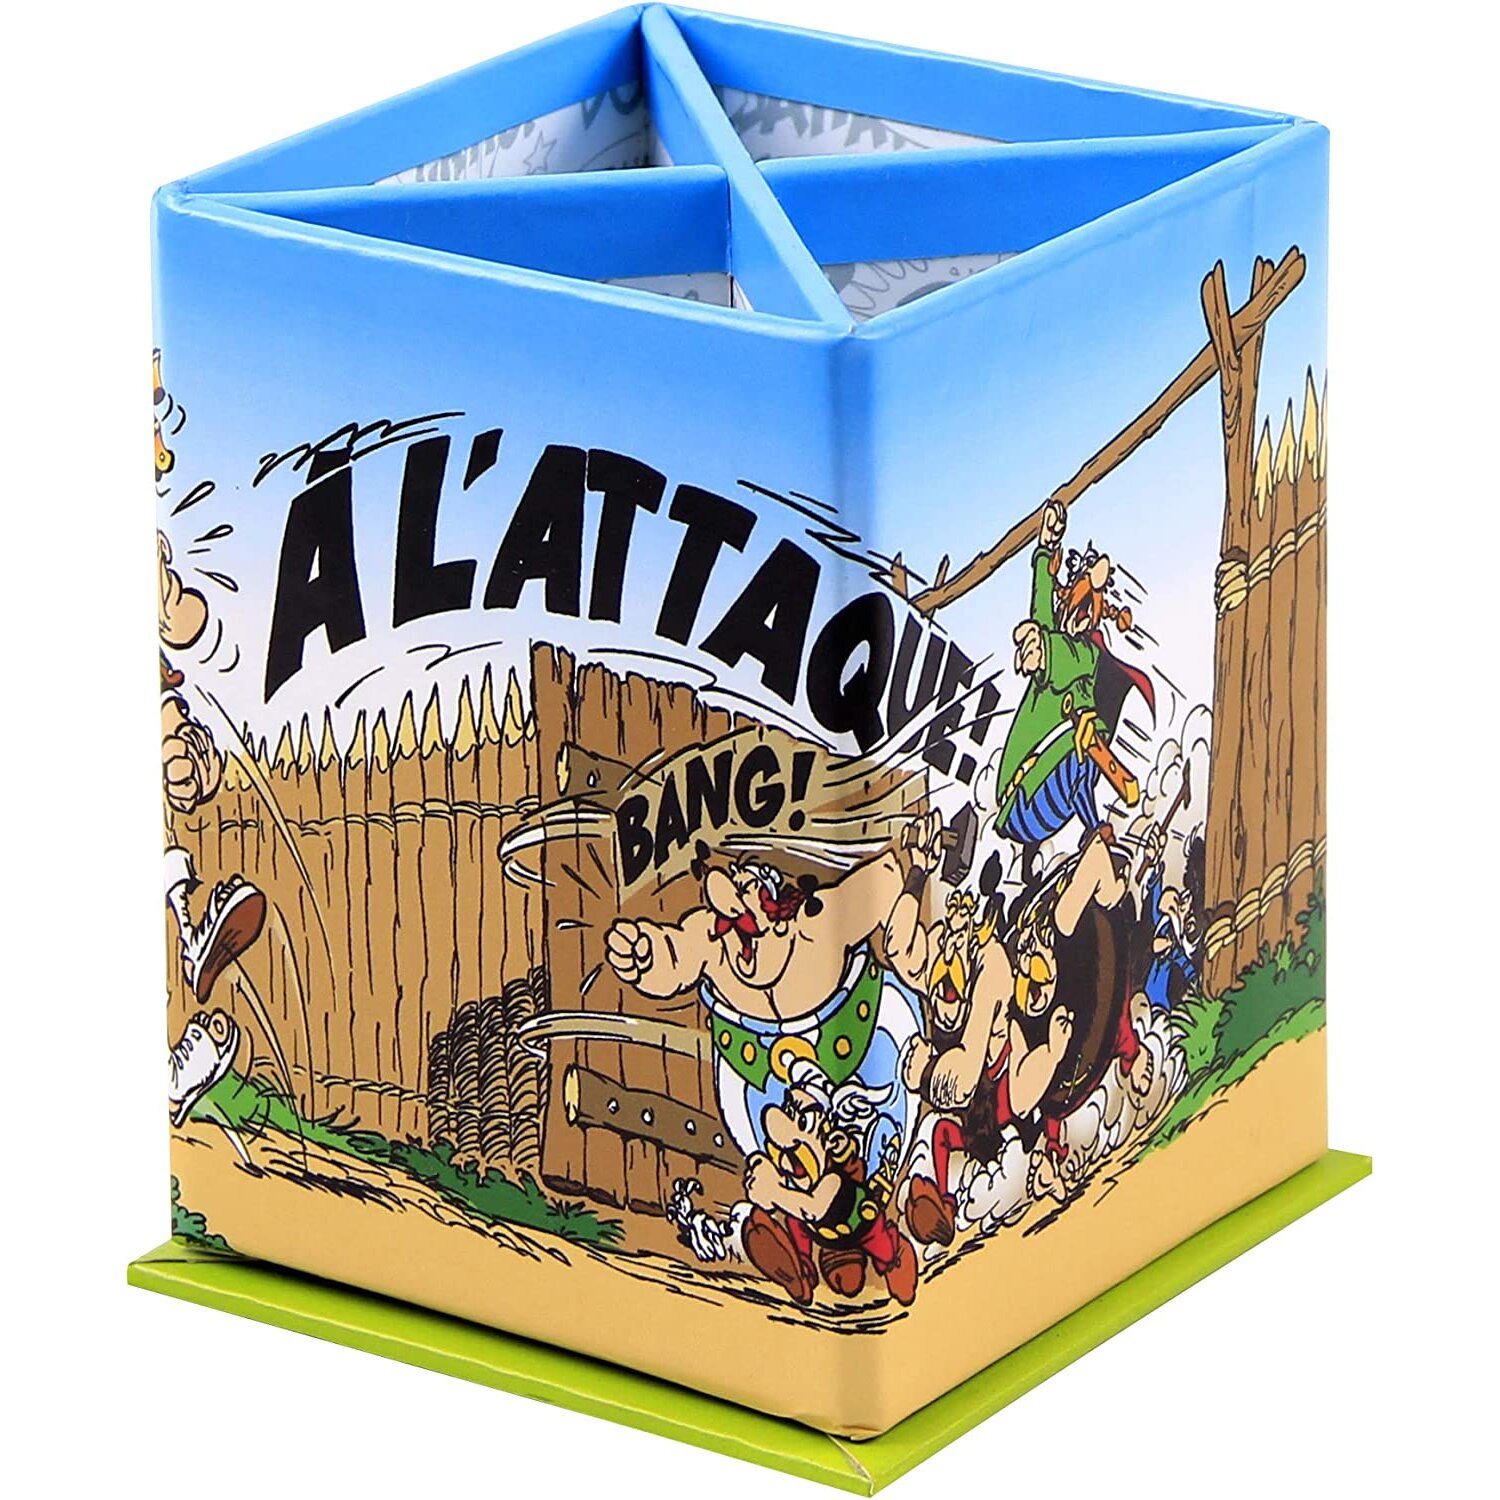 Clairefontaine Astérix 'The Gallic' Pencil Pot with Compartments